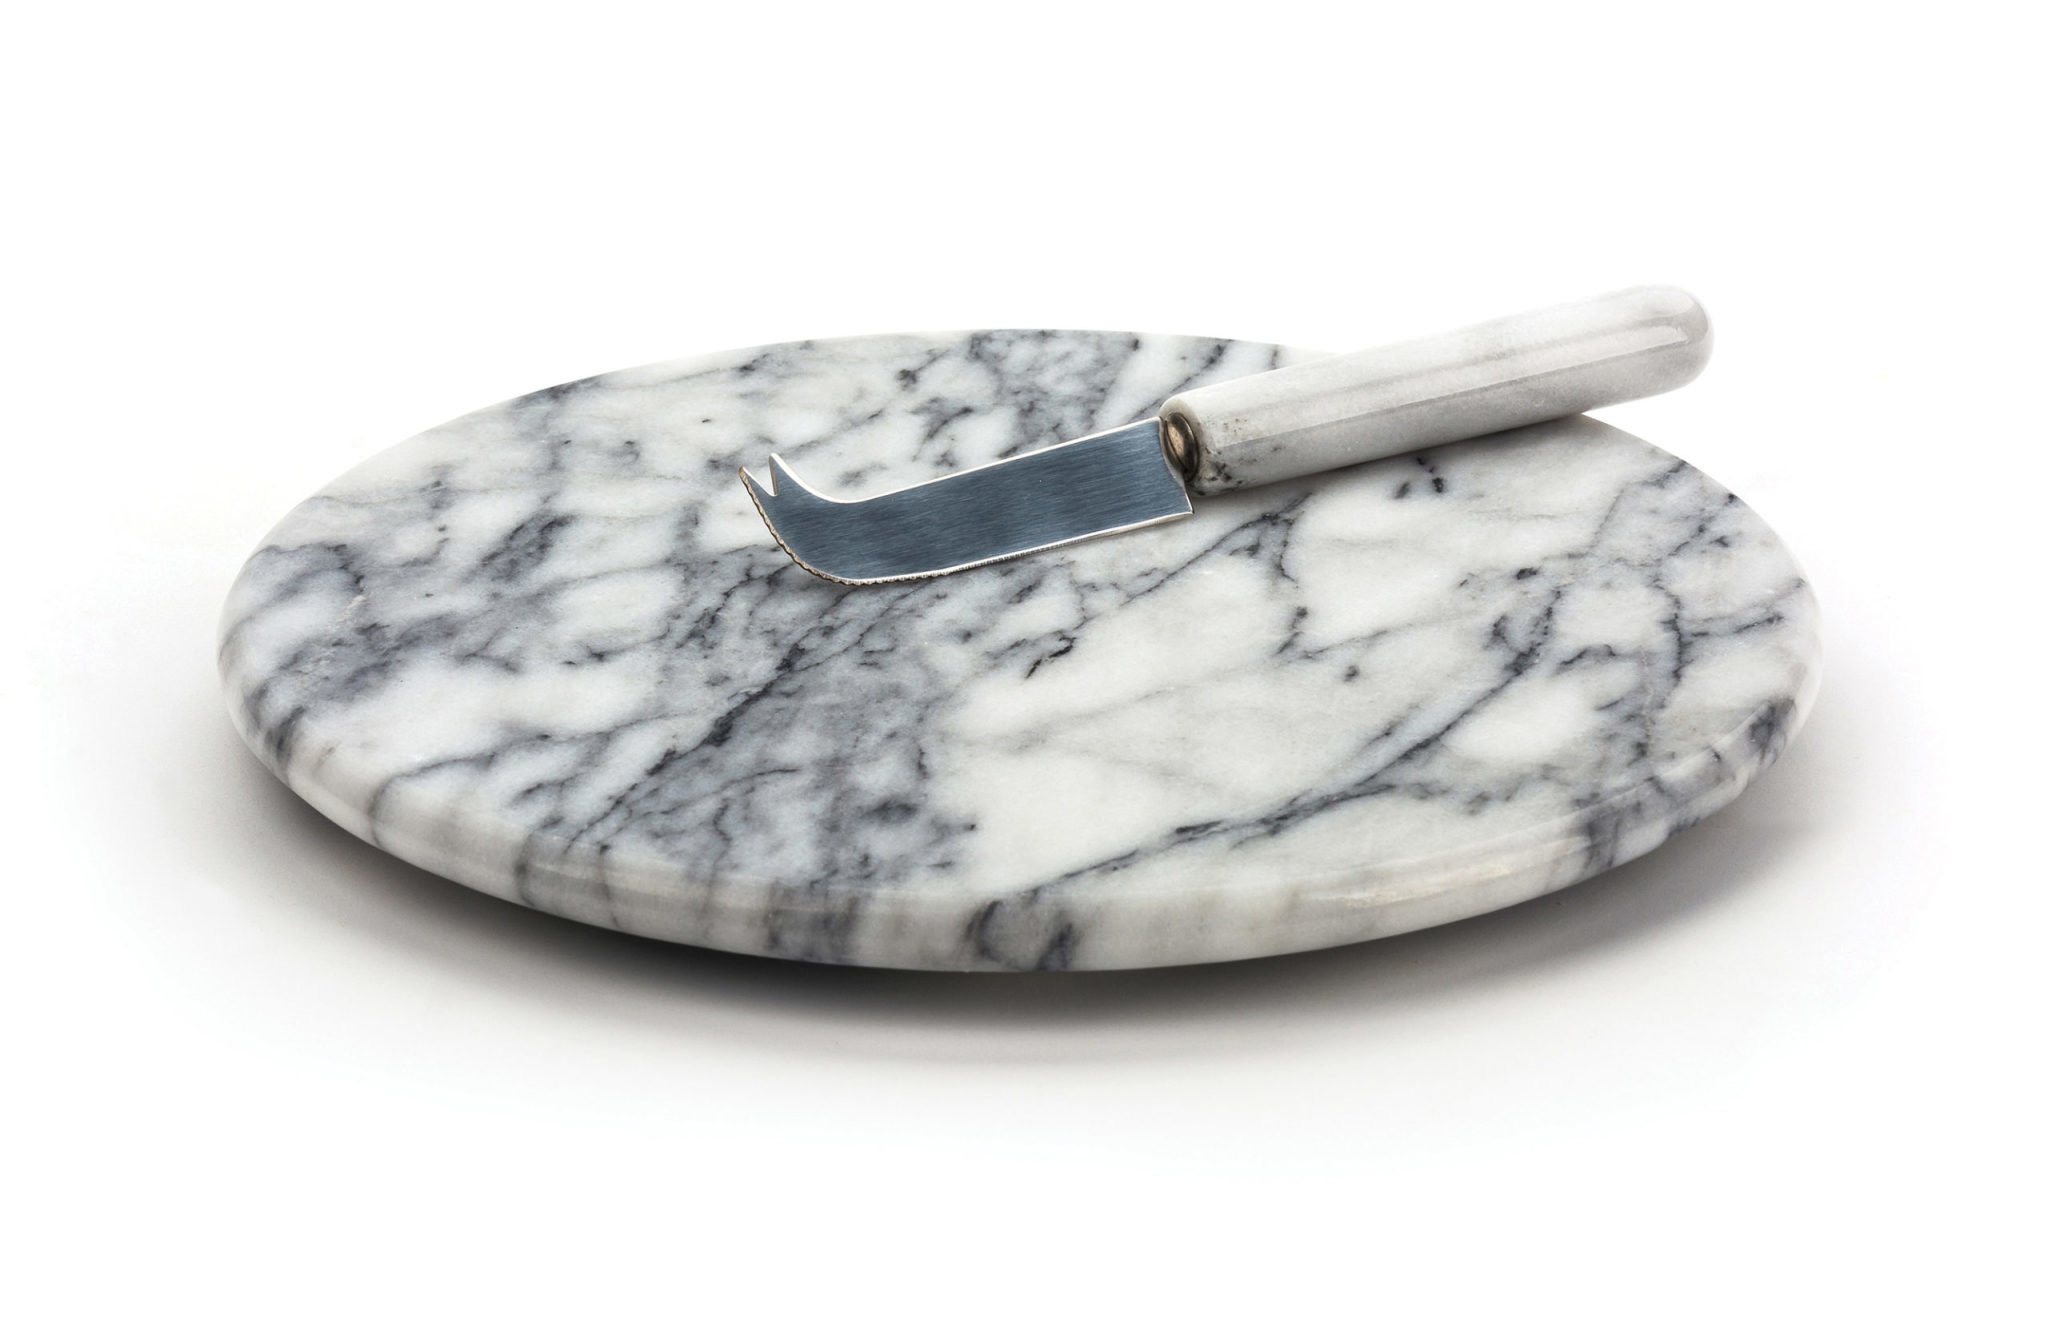 Marble White Cutting Board with Knife Cheese Board, Designer Sterling  Anchor Knife and Sterling Anchor Design